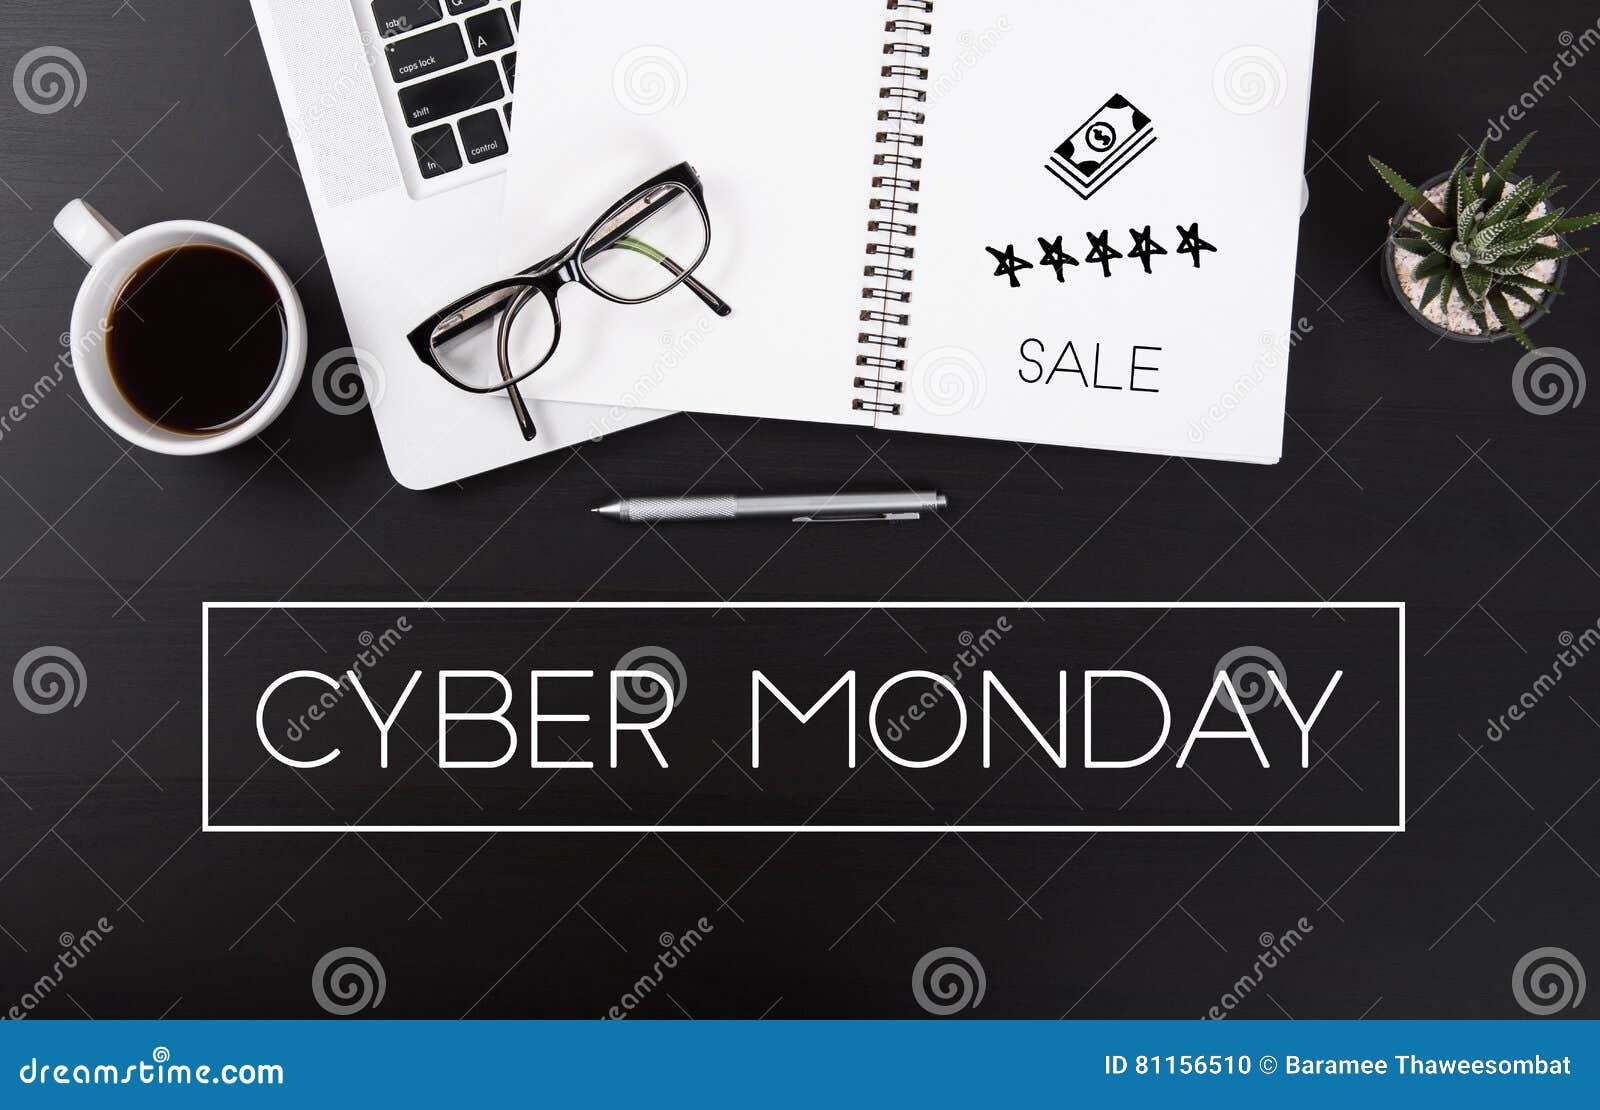 Modern Office Desk With Cyber Monday Message Homepage Stock Photo